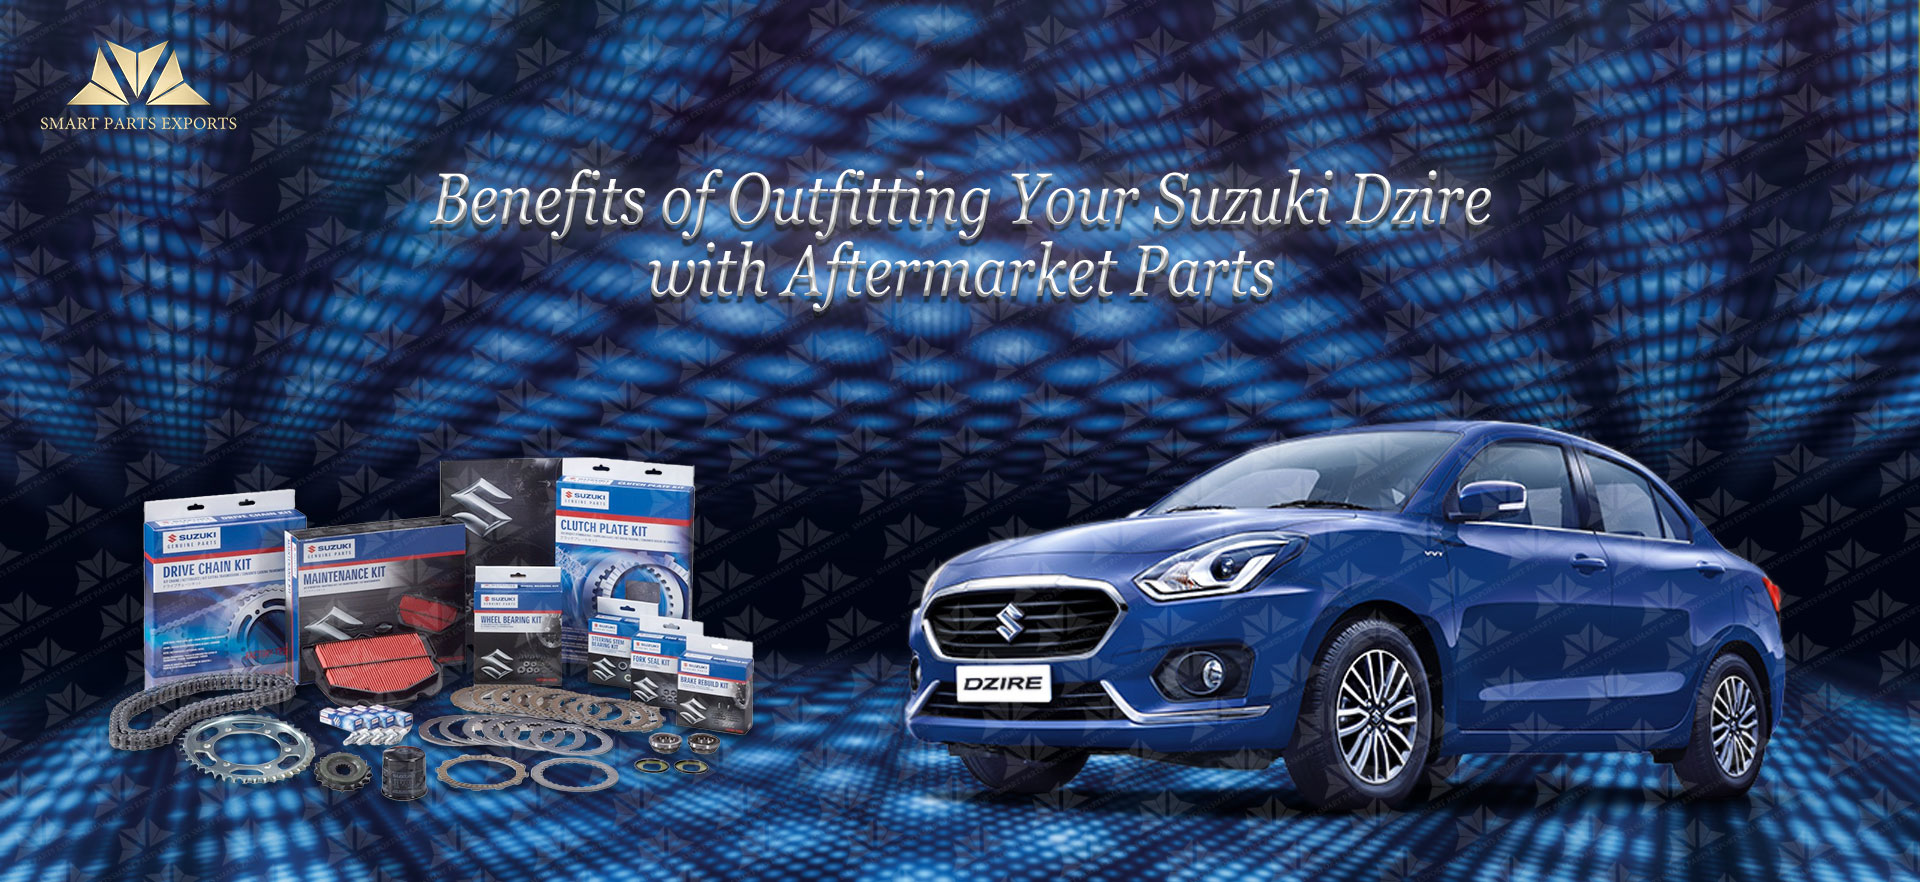 Benefits of Outfitting Your Suzuki Dzire with Aftermarket Parts